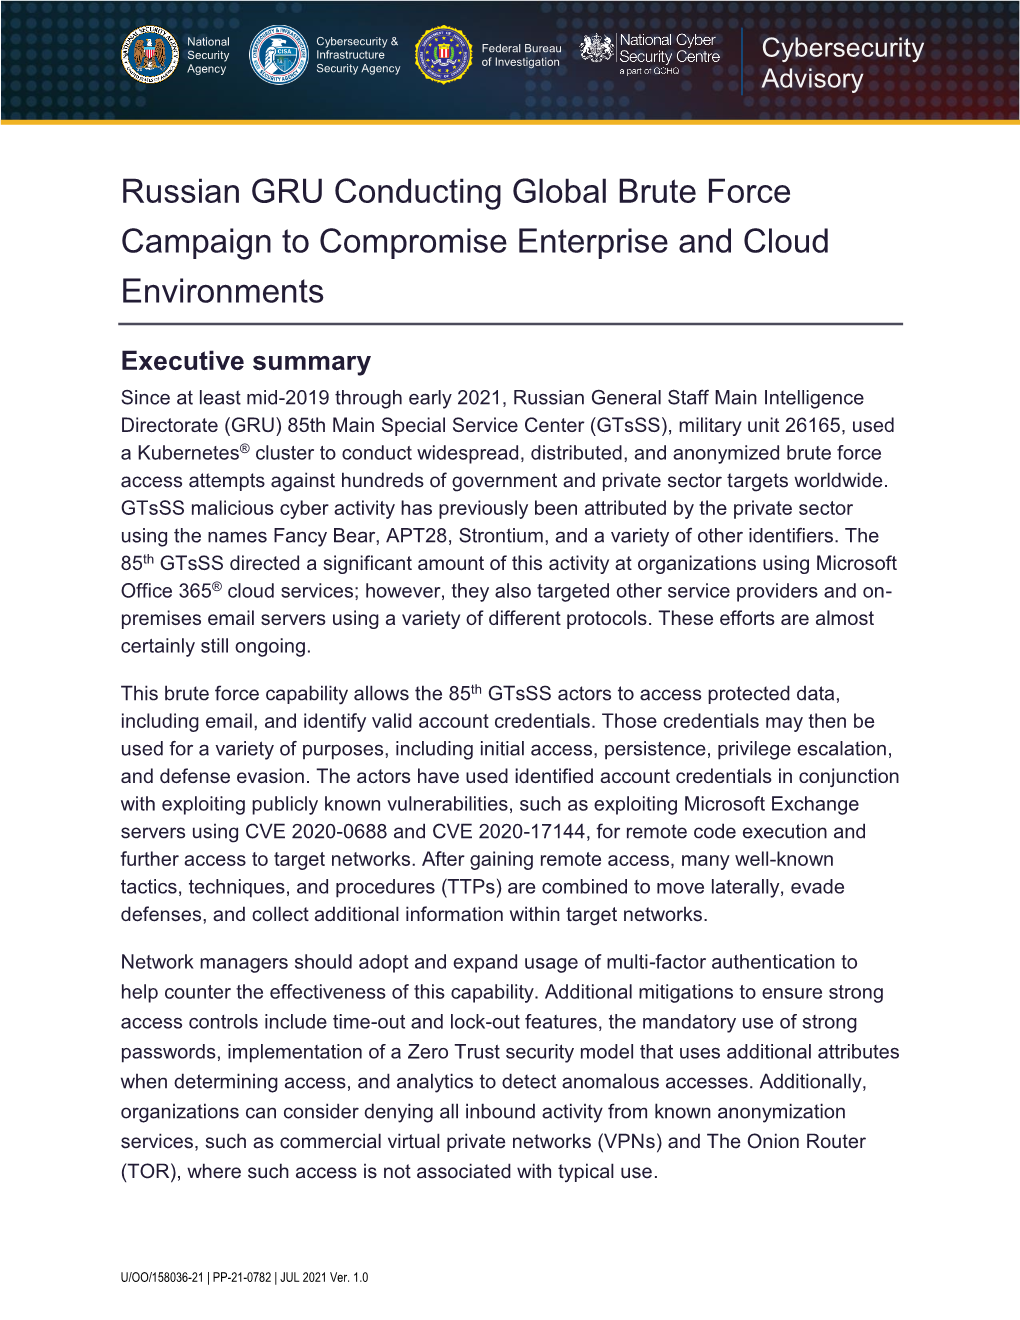 Russian GRU Conducting Global Brute Force Campaign to Compromise Enterprise and Cloud Environments